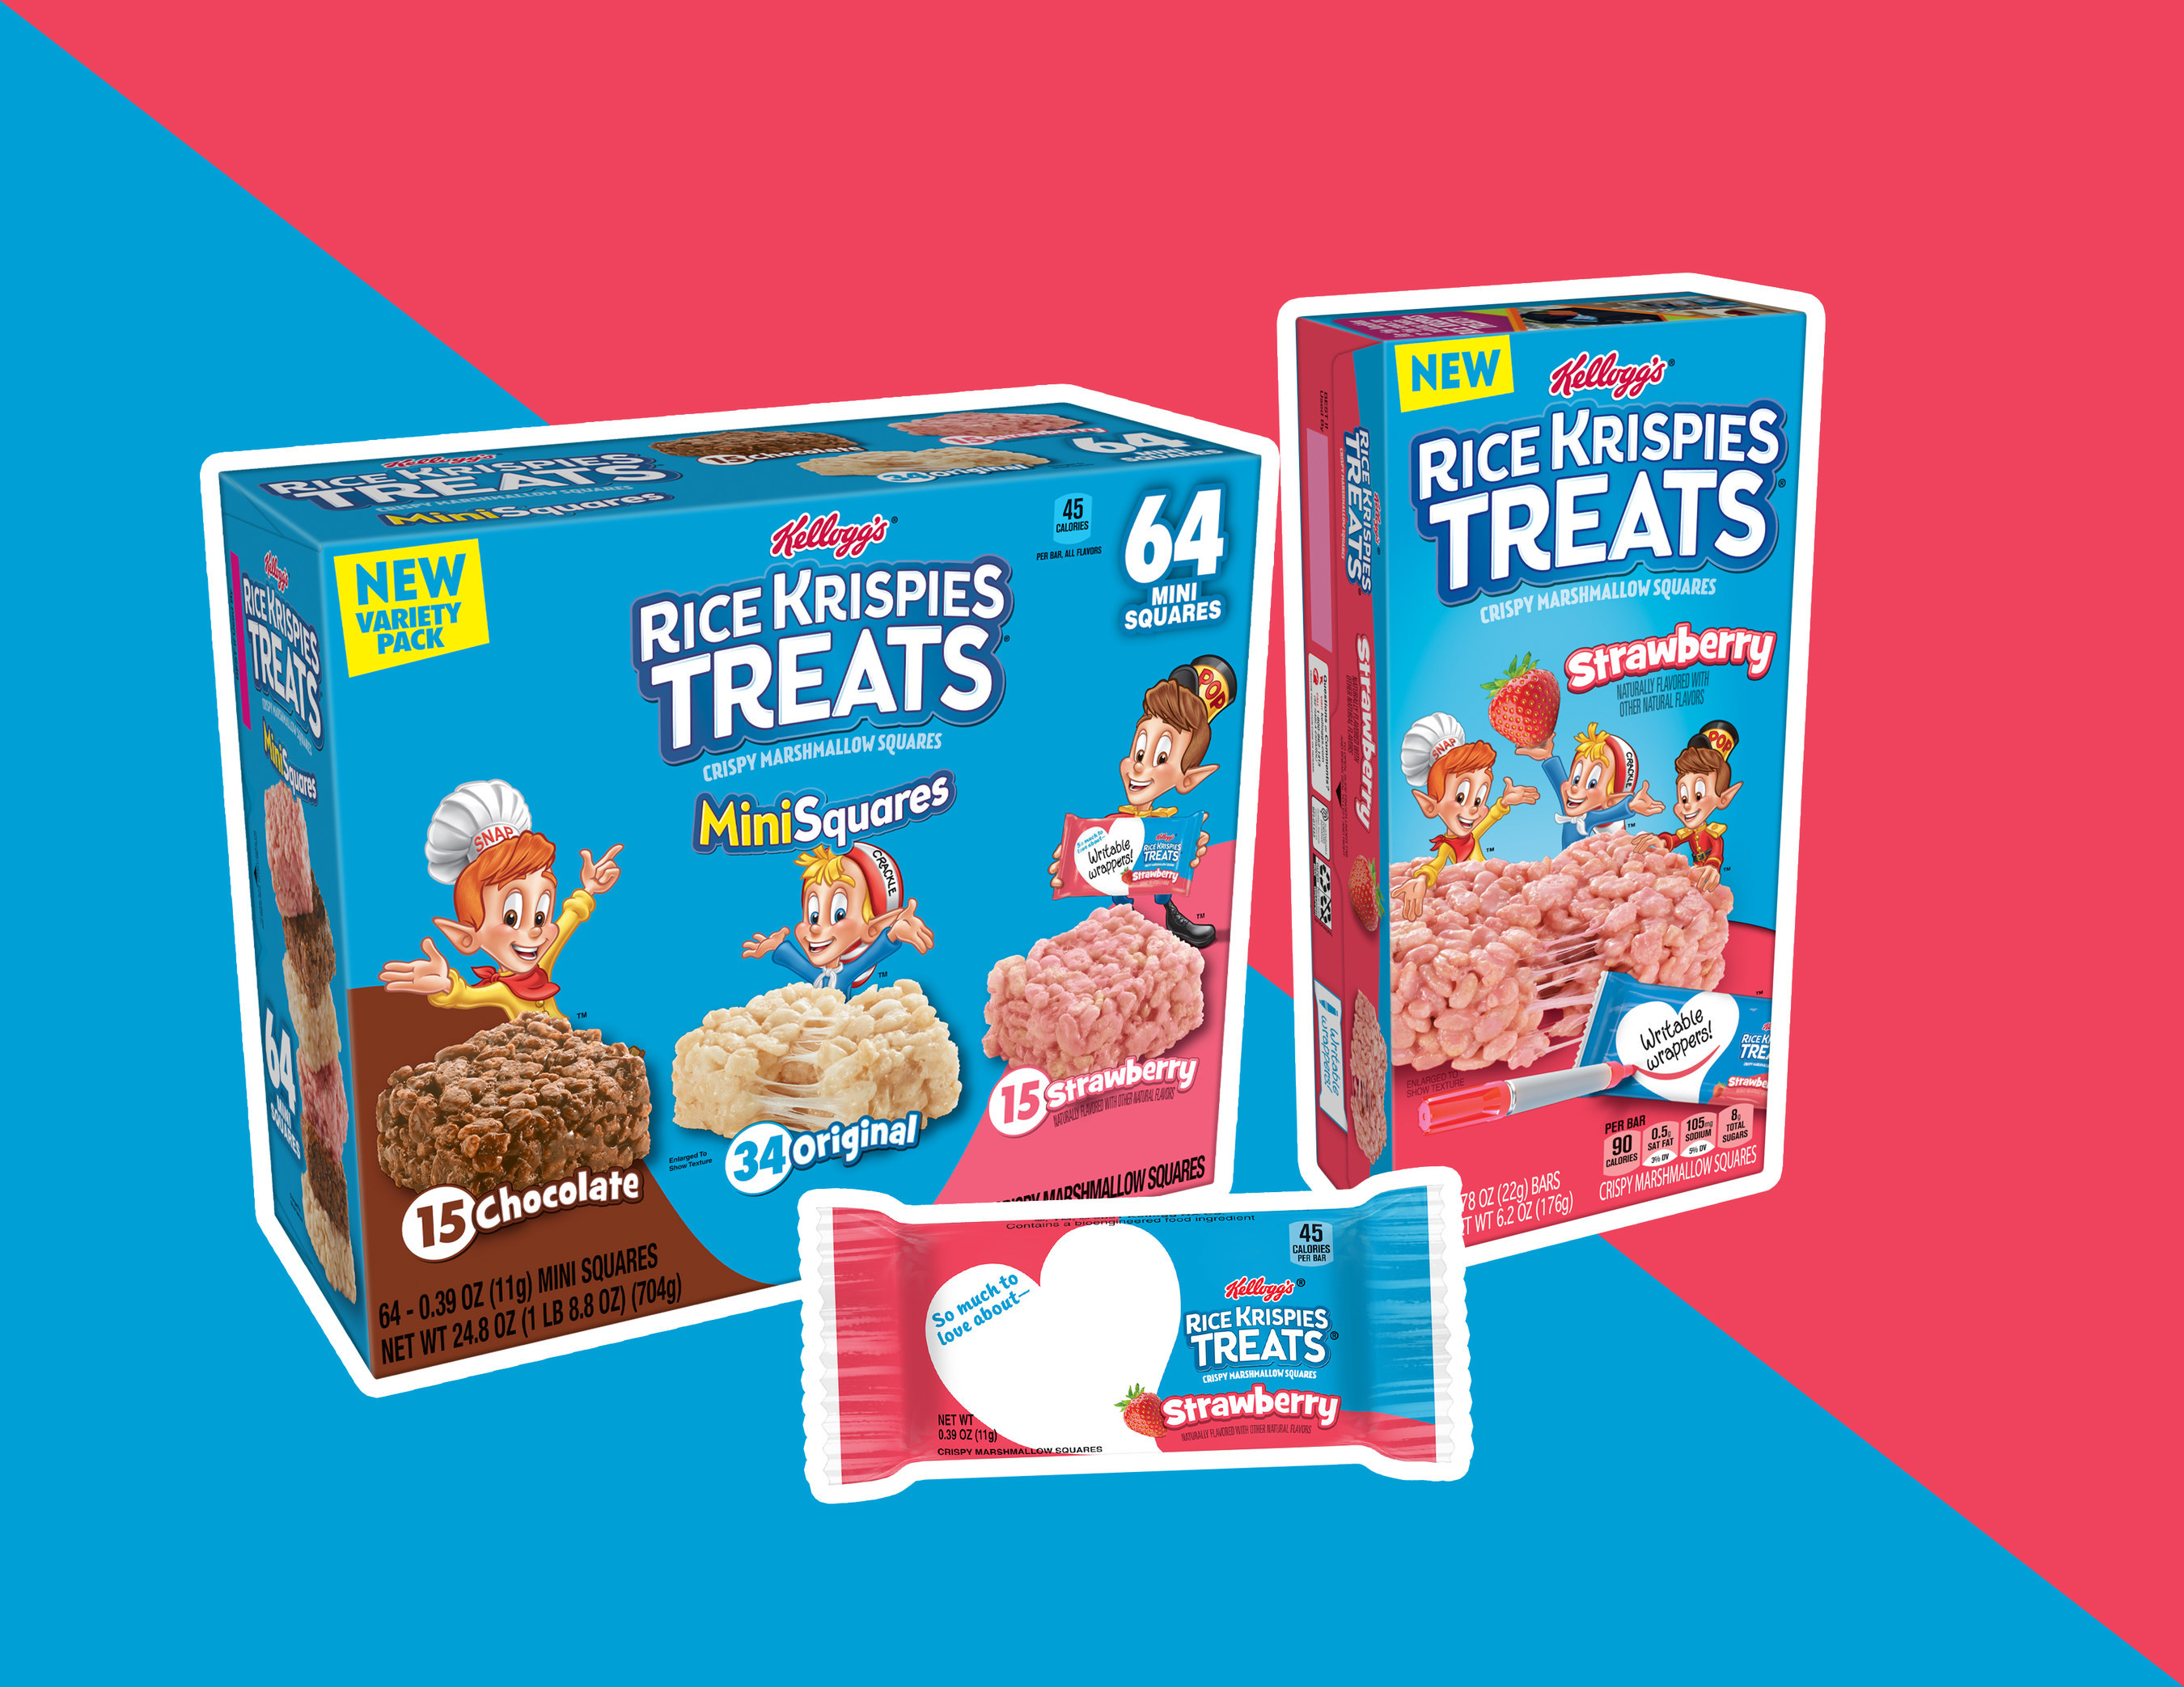 Just in Time for Summer, Rice Krispies Treats® Brings Back a Fan-Favorite, Rice  Krispies Treats Strawberry, & Launches New Neapolitan Ice Cream-Inspired  Mini-Squares Variety Pack - May 11, 2021